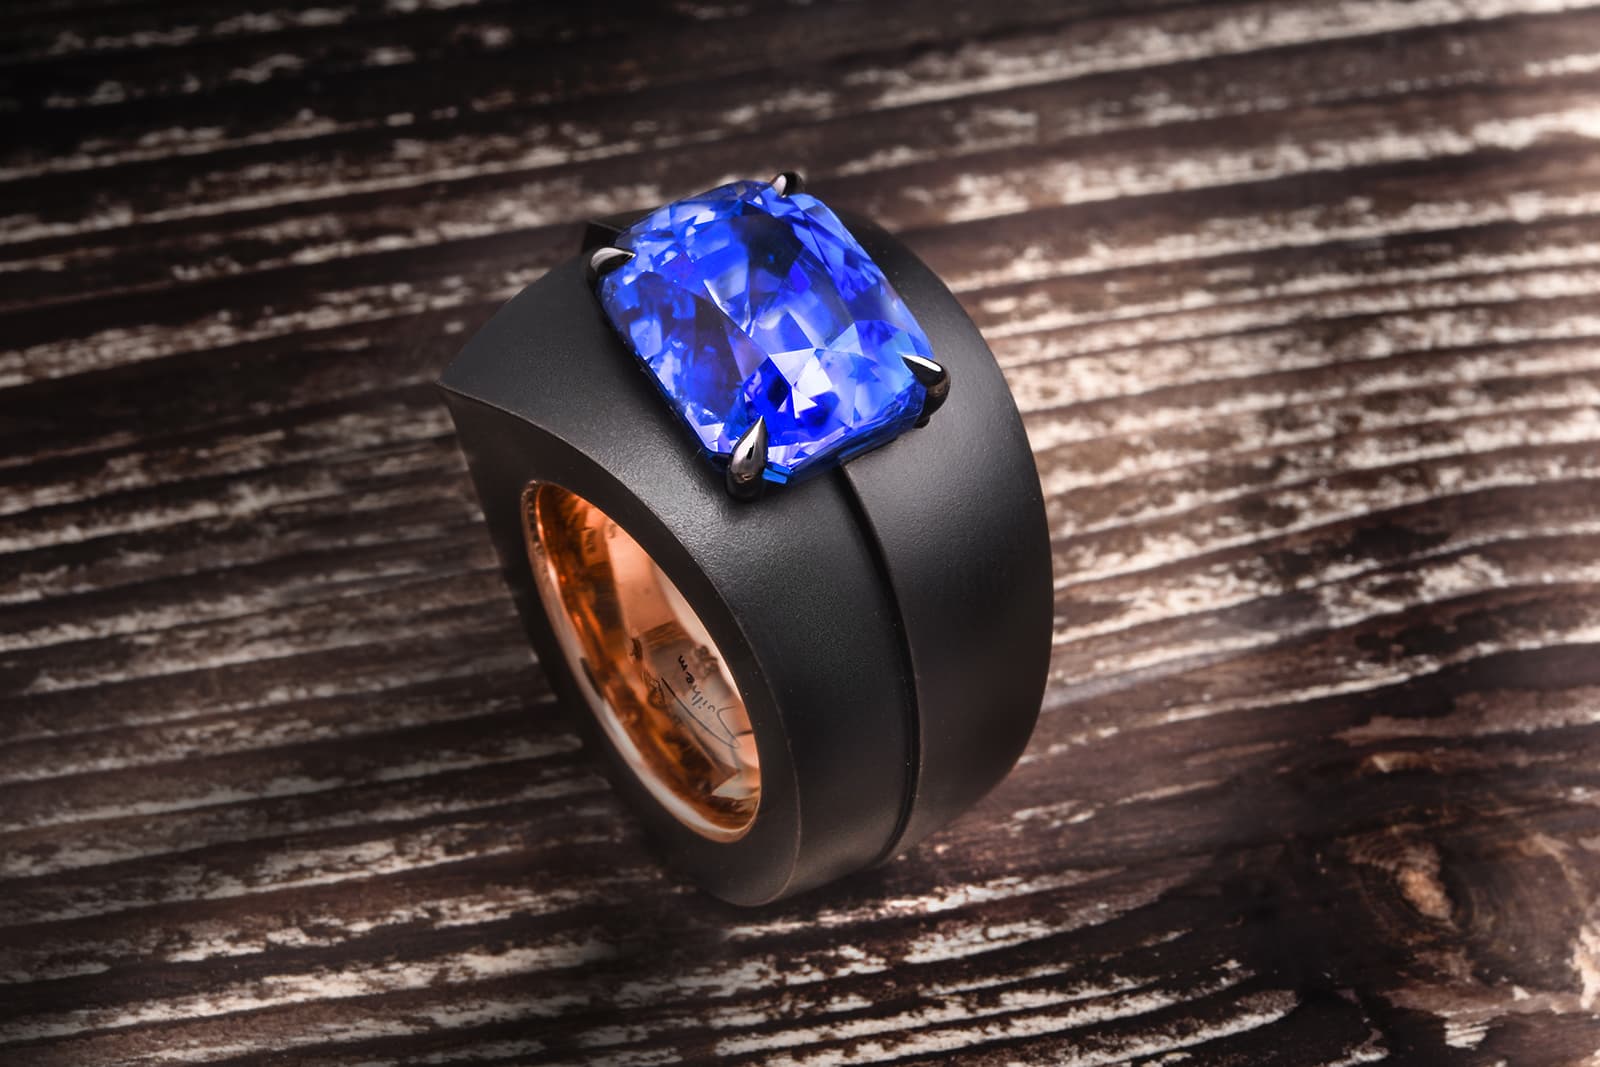 Philippe Guilhem Velya natural 18.77-carat sapphire, bronze and rose gold ring, from the Mashandy collection